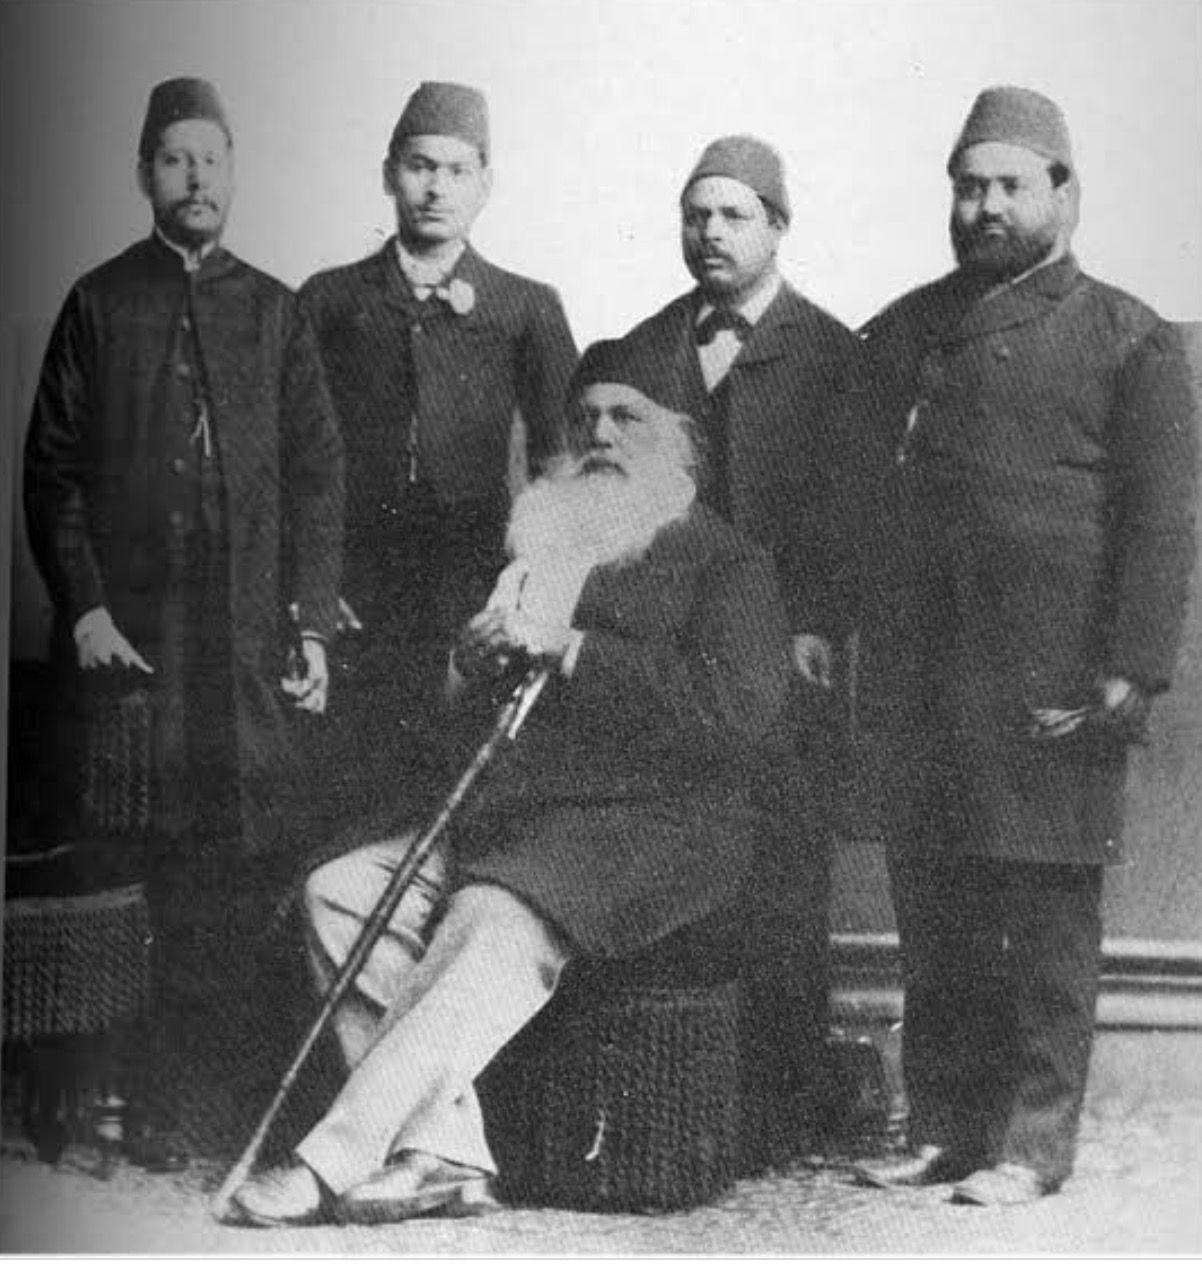 Secularisation without secularism: 19th-century Muslim reformists in India attempted to relegate Islamic rituals to the private space and bring Islam as a political identity-marker in public sphere.